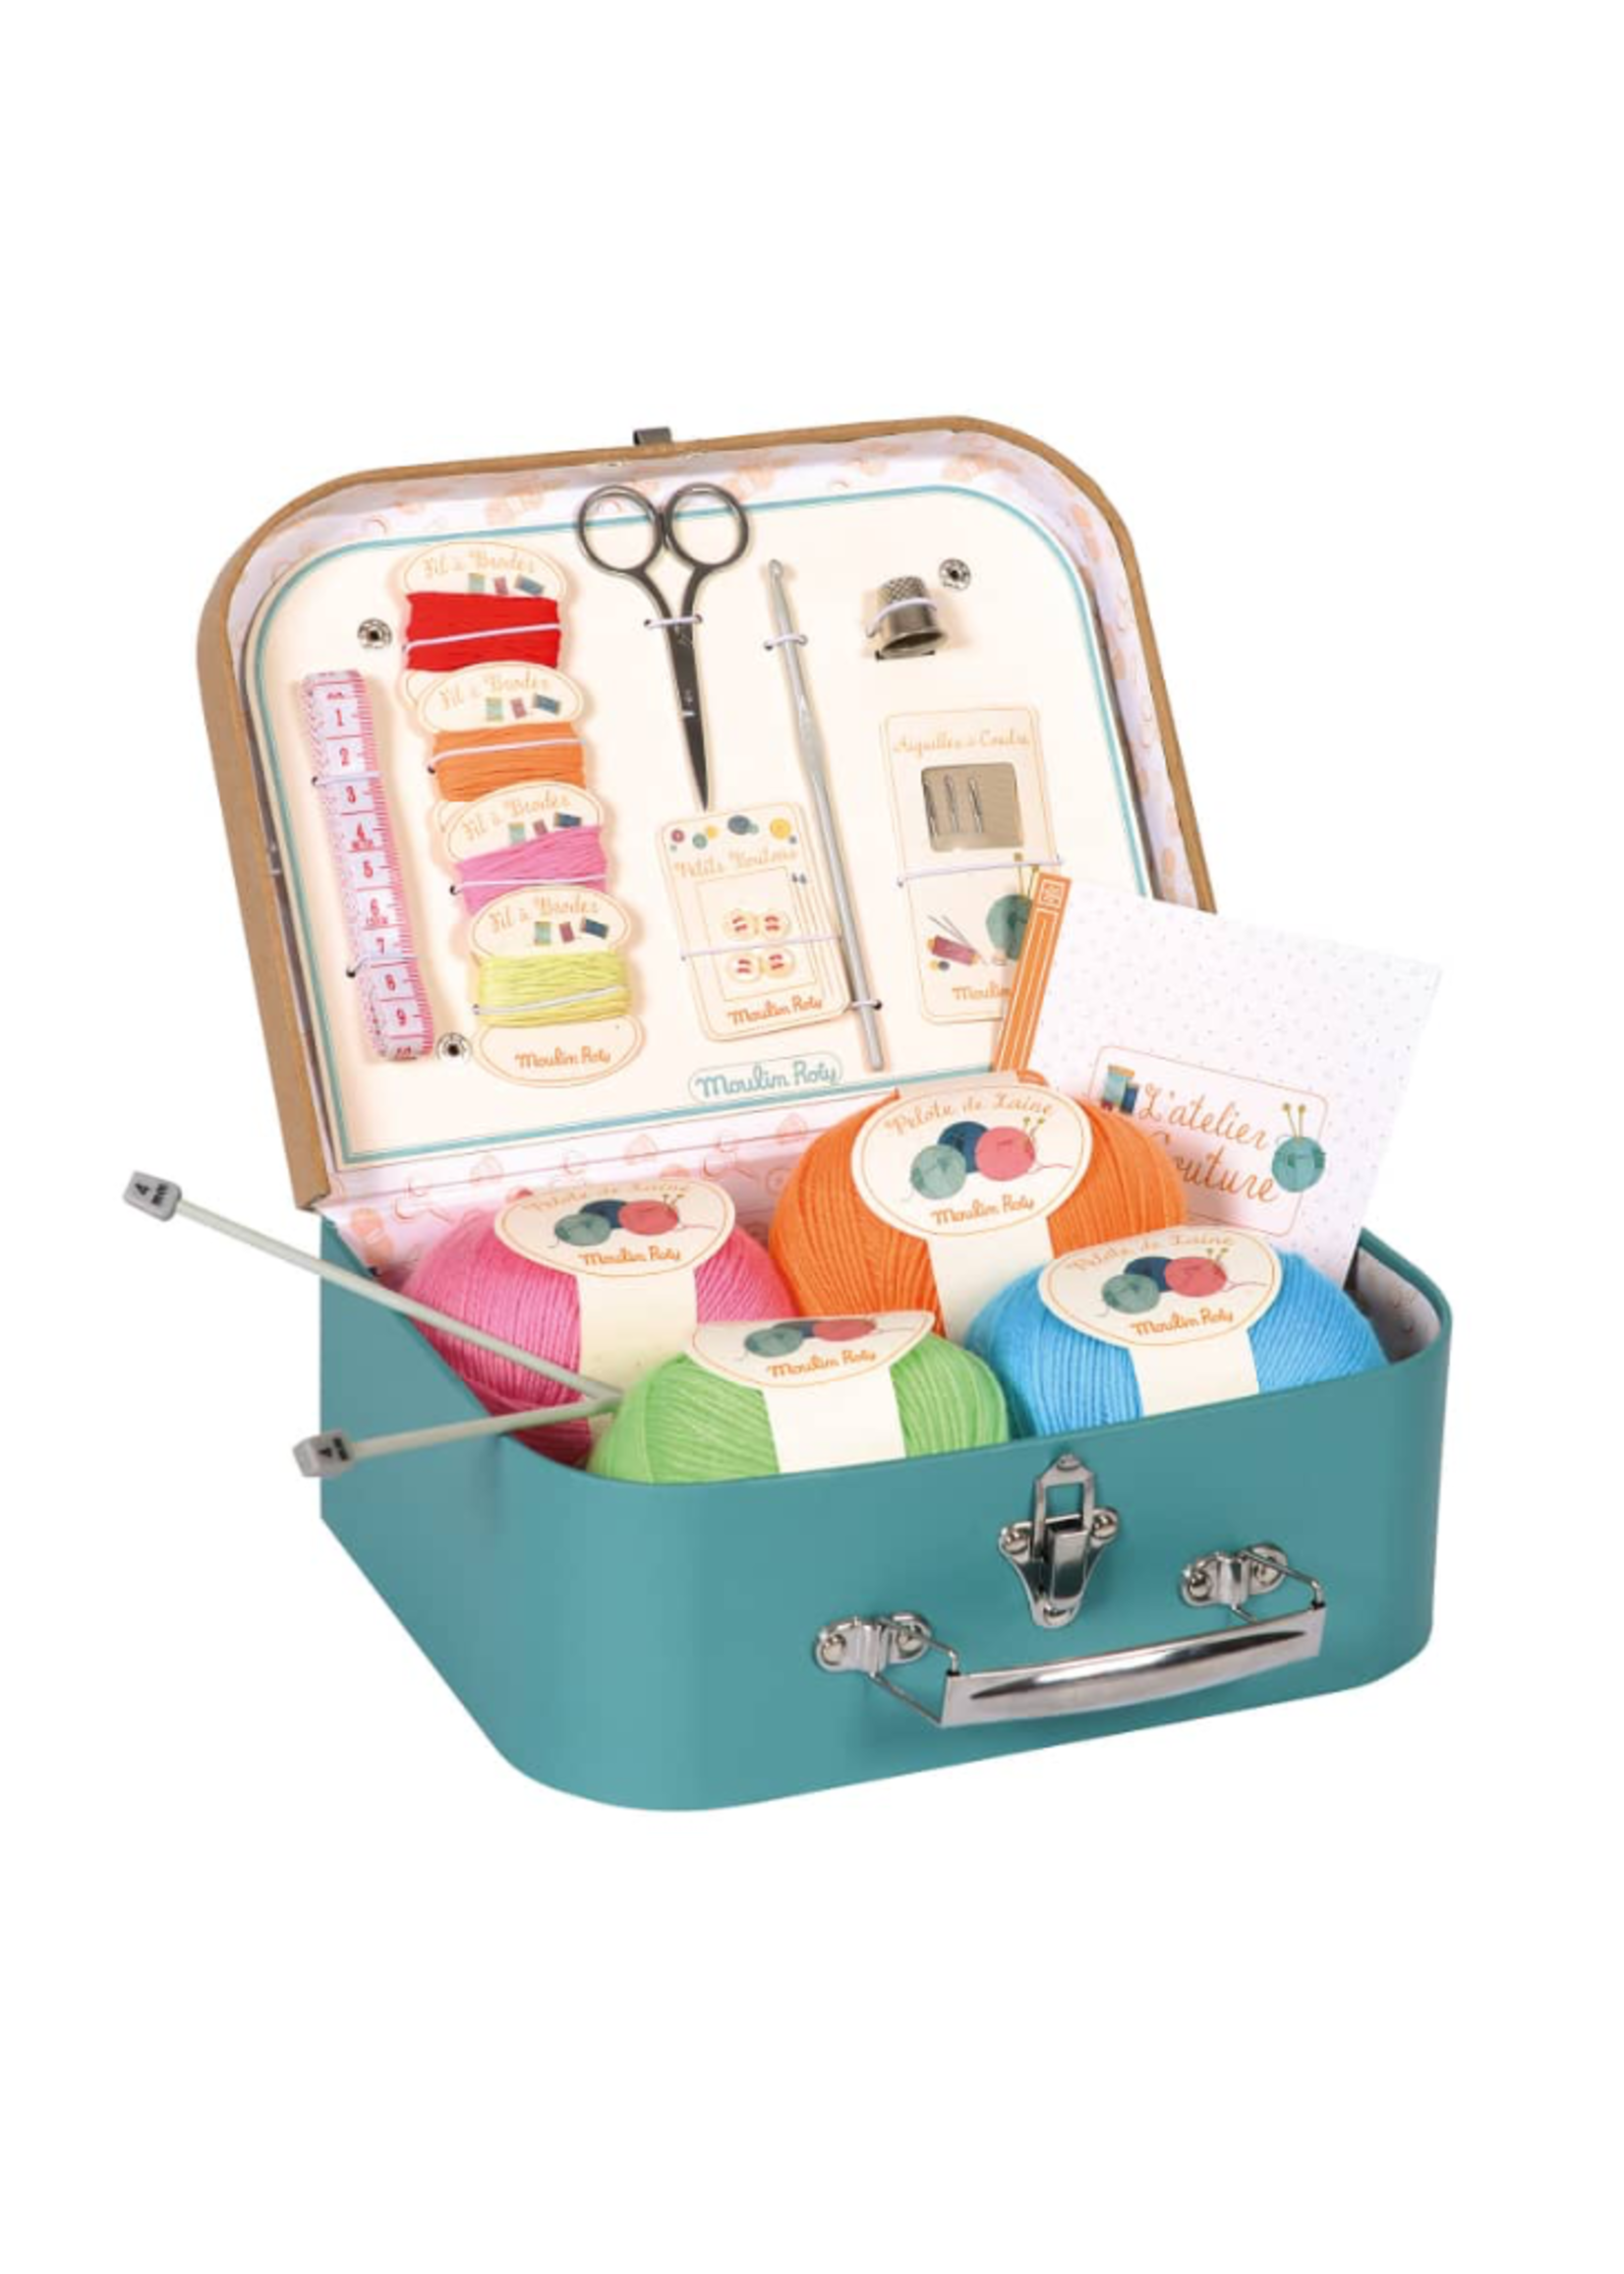 Moulin Roty Sewing & Knitting Set in Suitcase